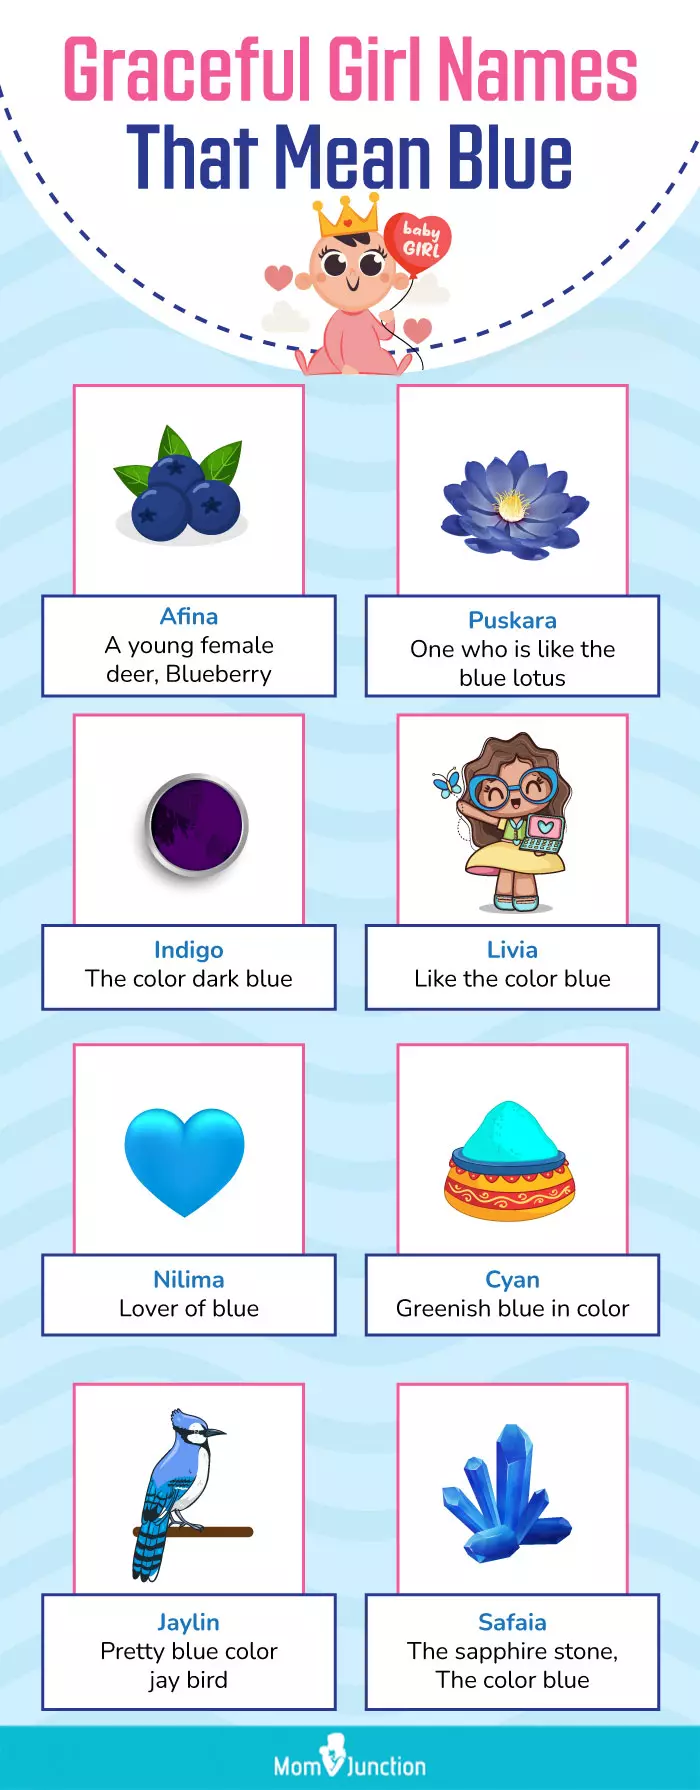 graceful girl names that mean blue (infographic)